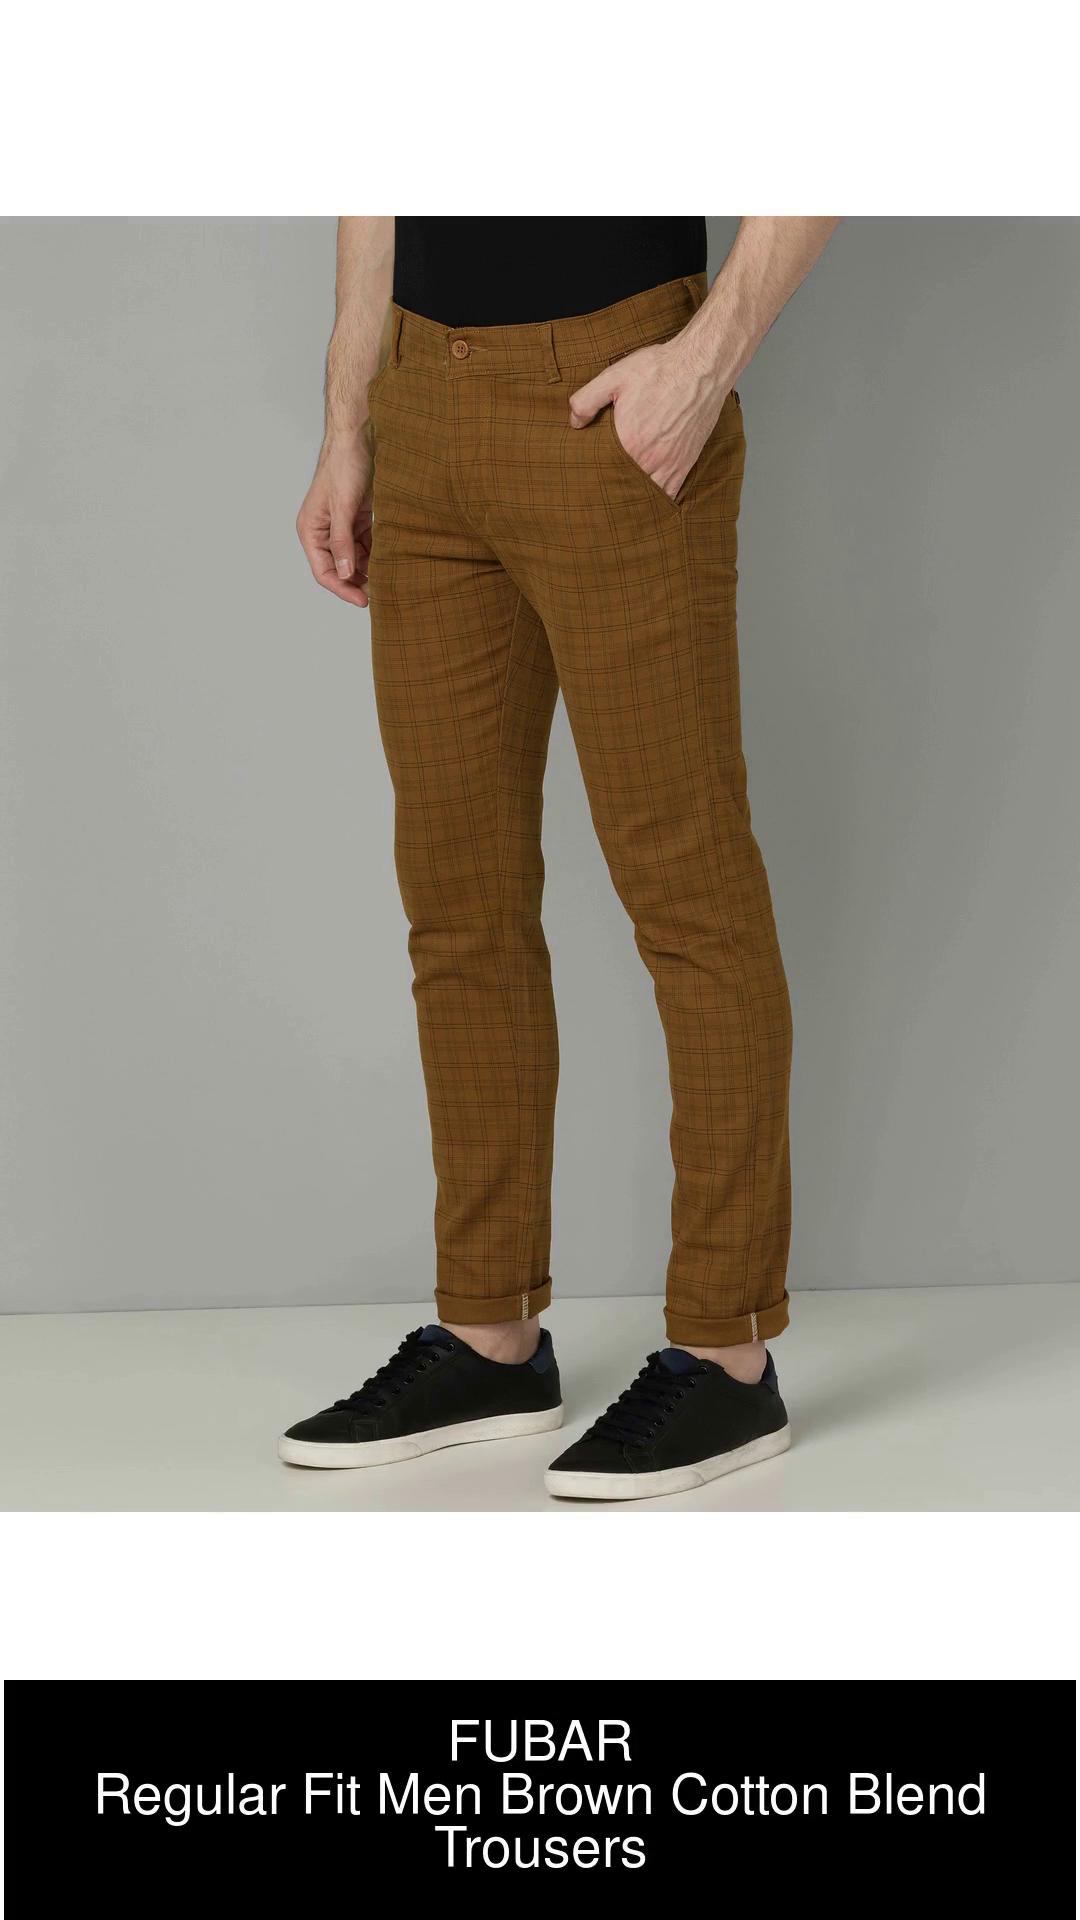 Buy Peter England Casuals Brown Cotton Slim Fit Trousers for Mens Online   Tata CLiQ